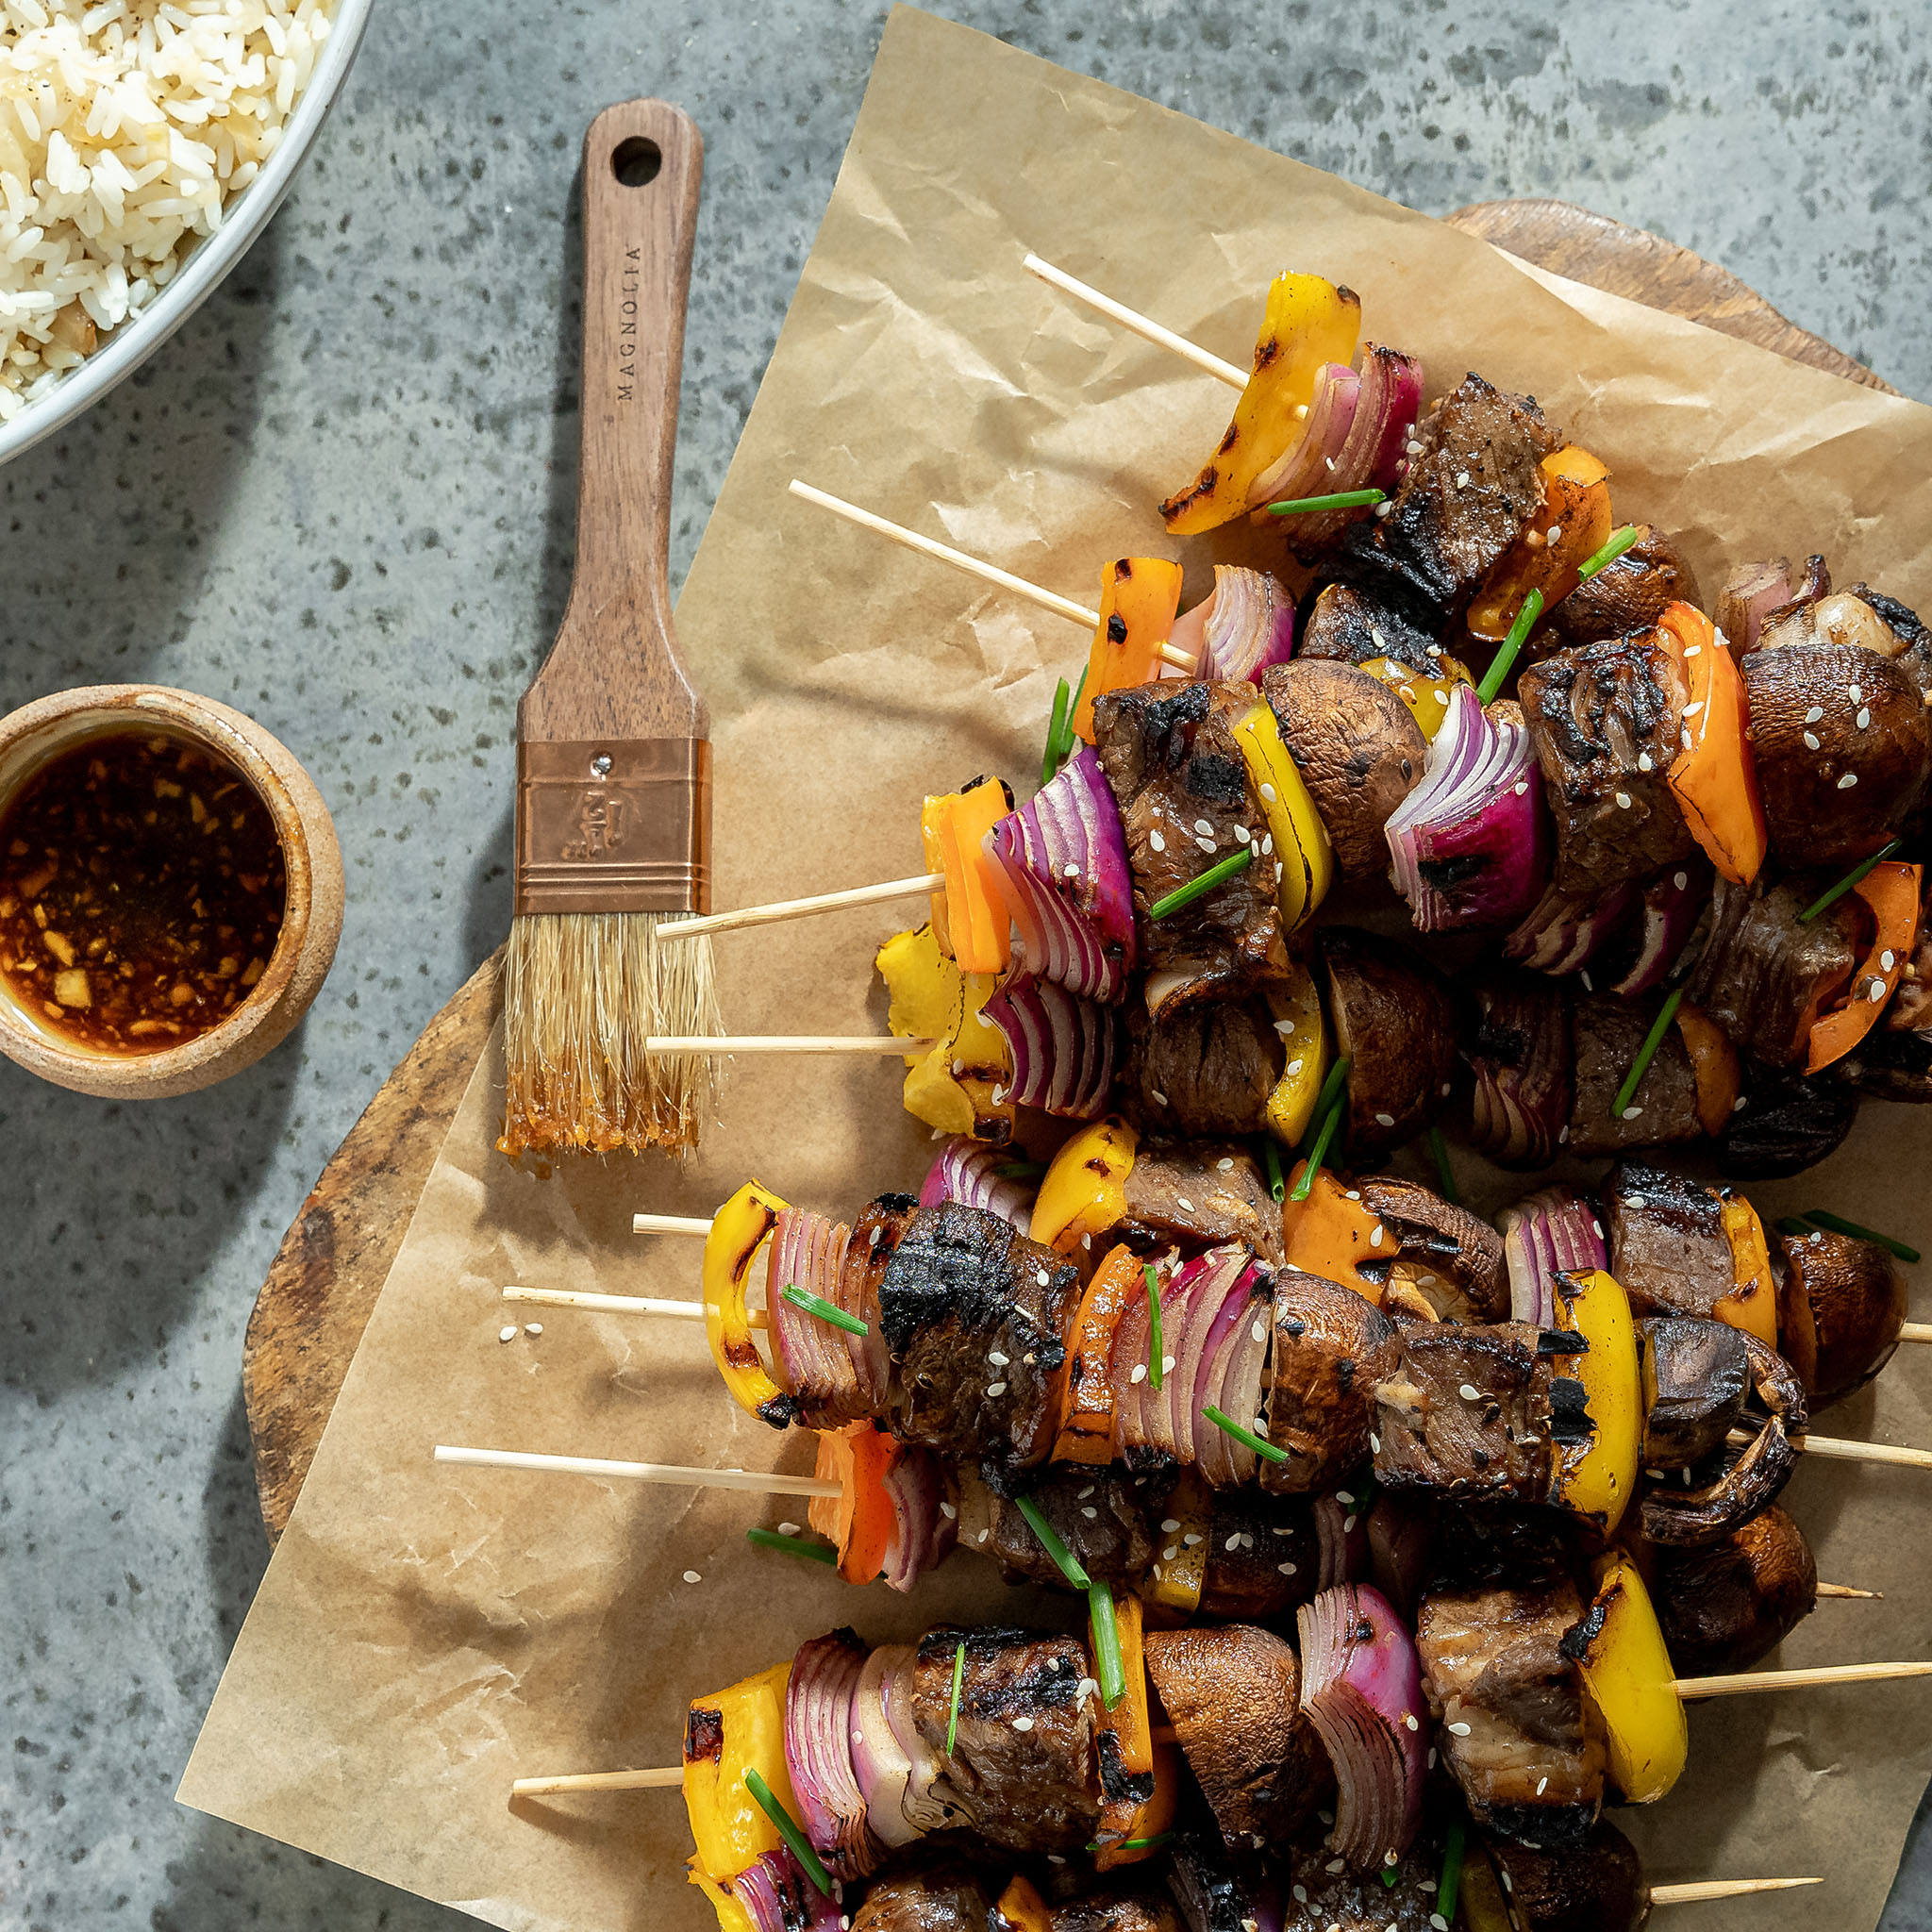 Kebabs: The Skewered and Grilled Meat Dish – Recette Magazine